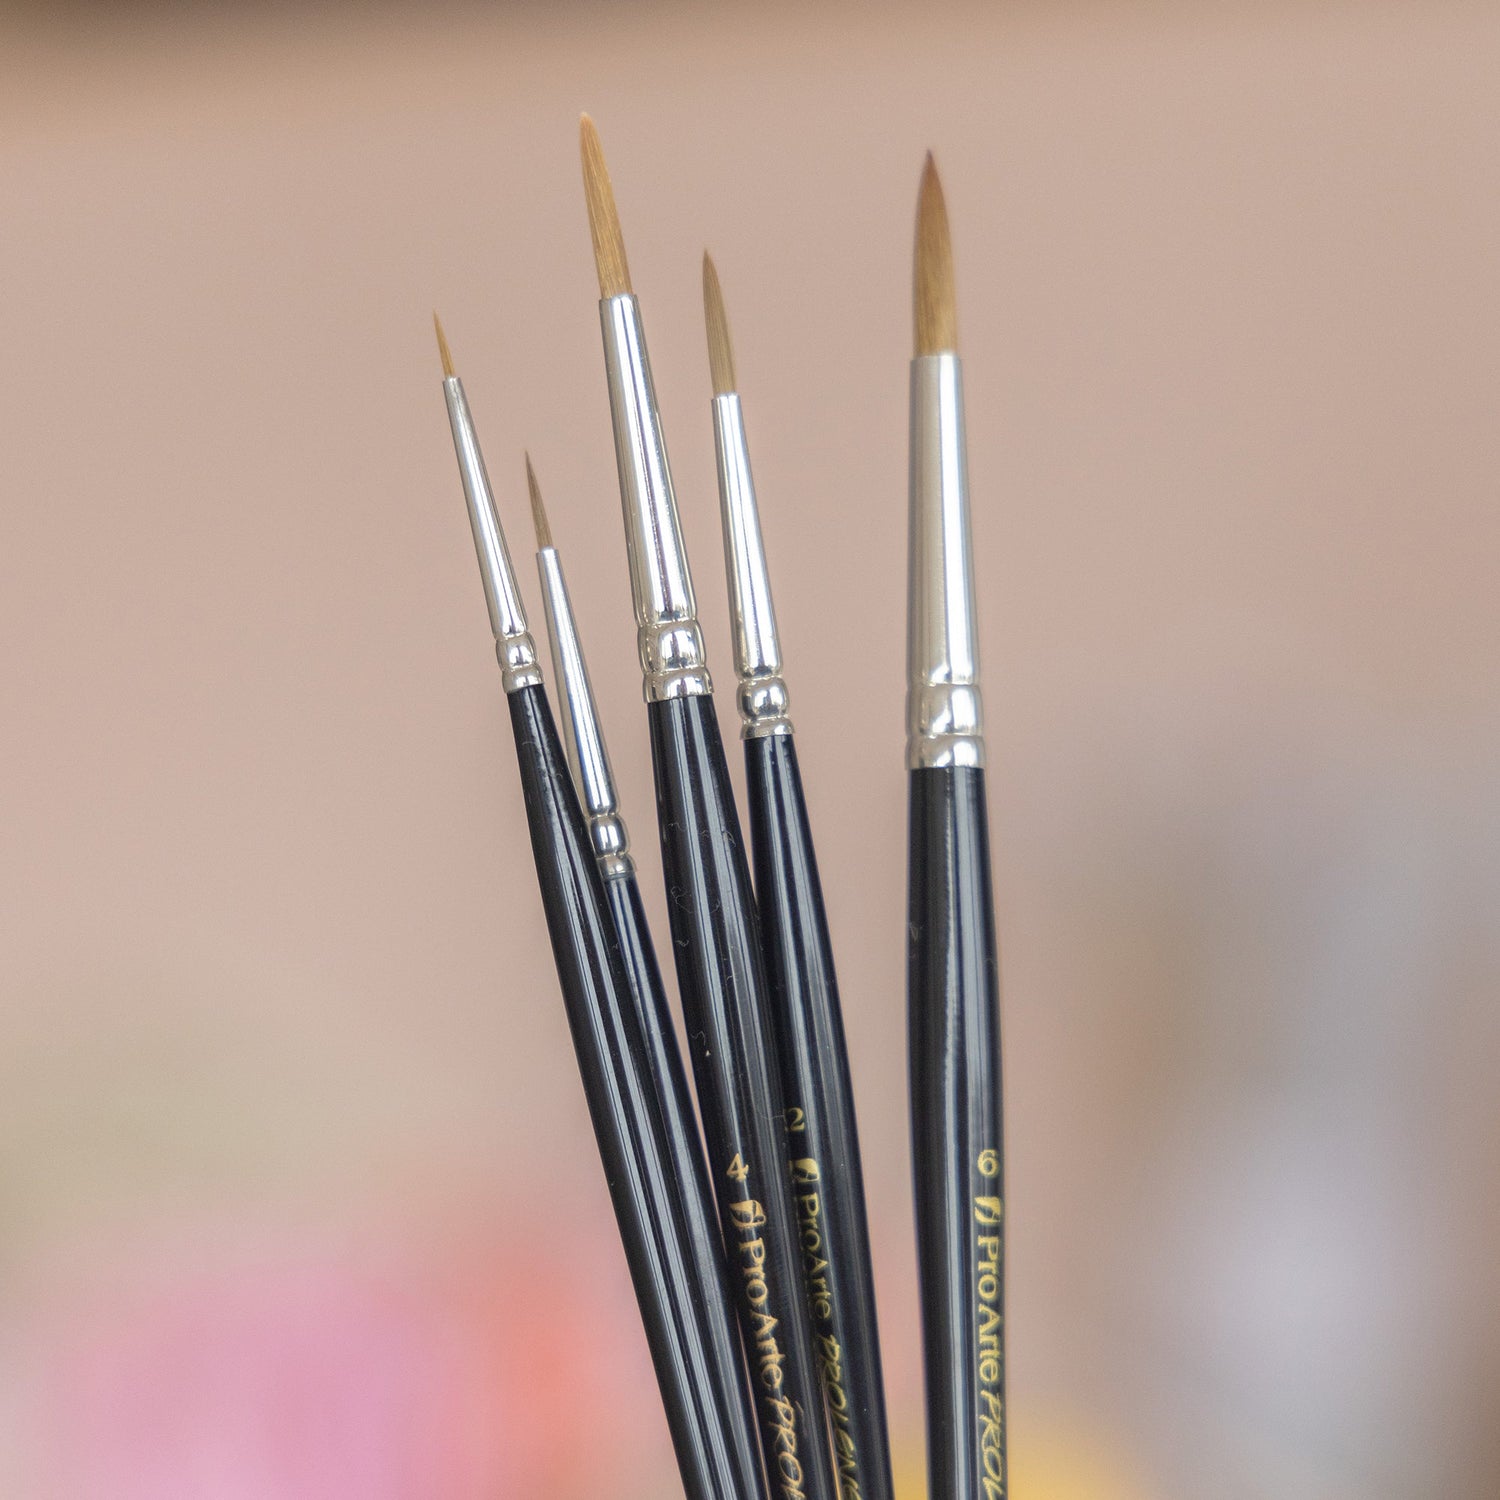 A selection of five Pro Arte Prolene fine pointed watercolour paint brushes in varying sizes.